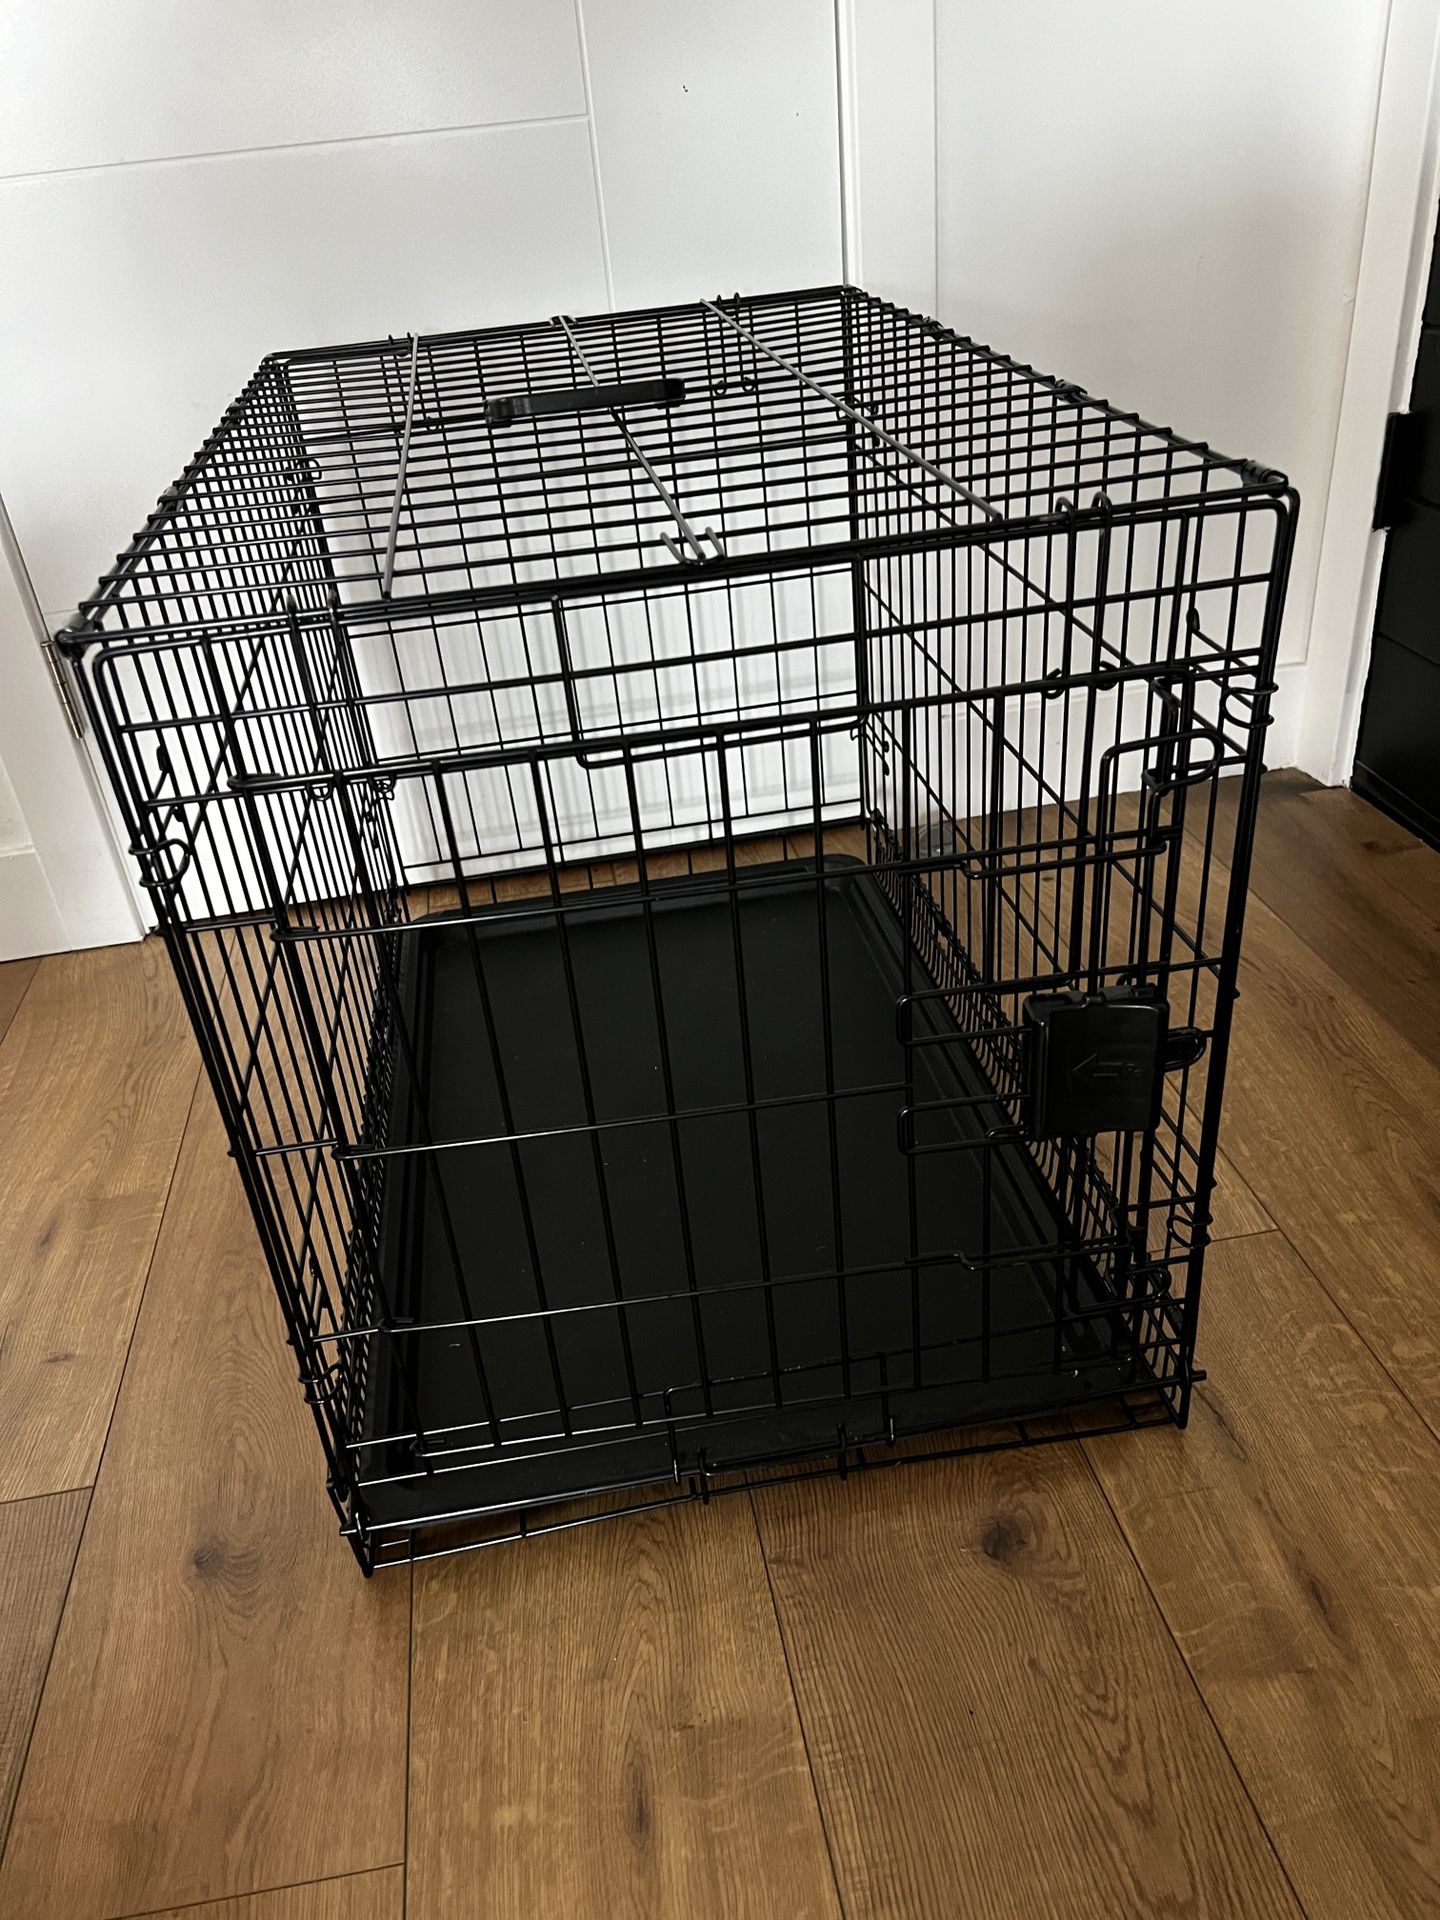 Foldable Metal Wire Dog Crate with Tray, Single Door, 30 x 19 x 21 Inches, Black